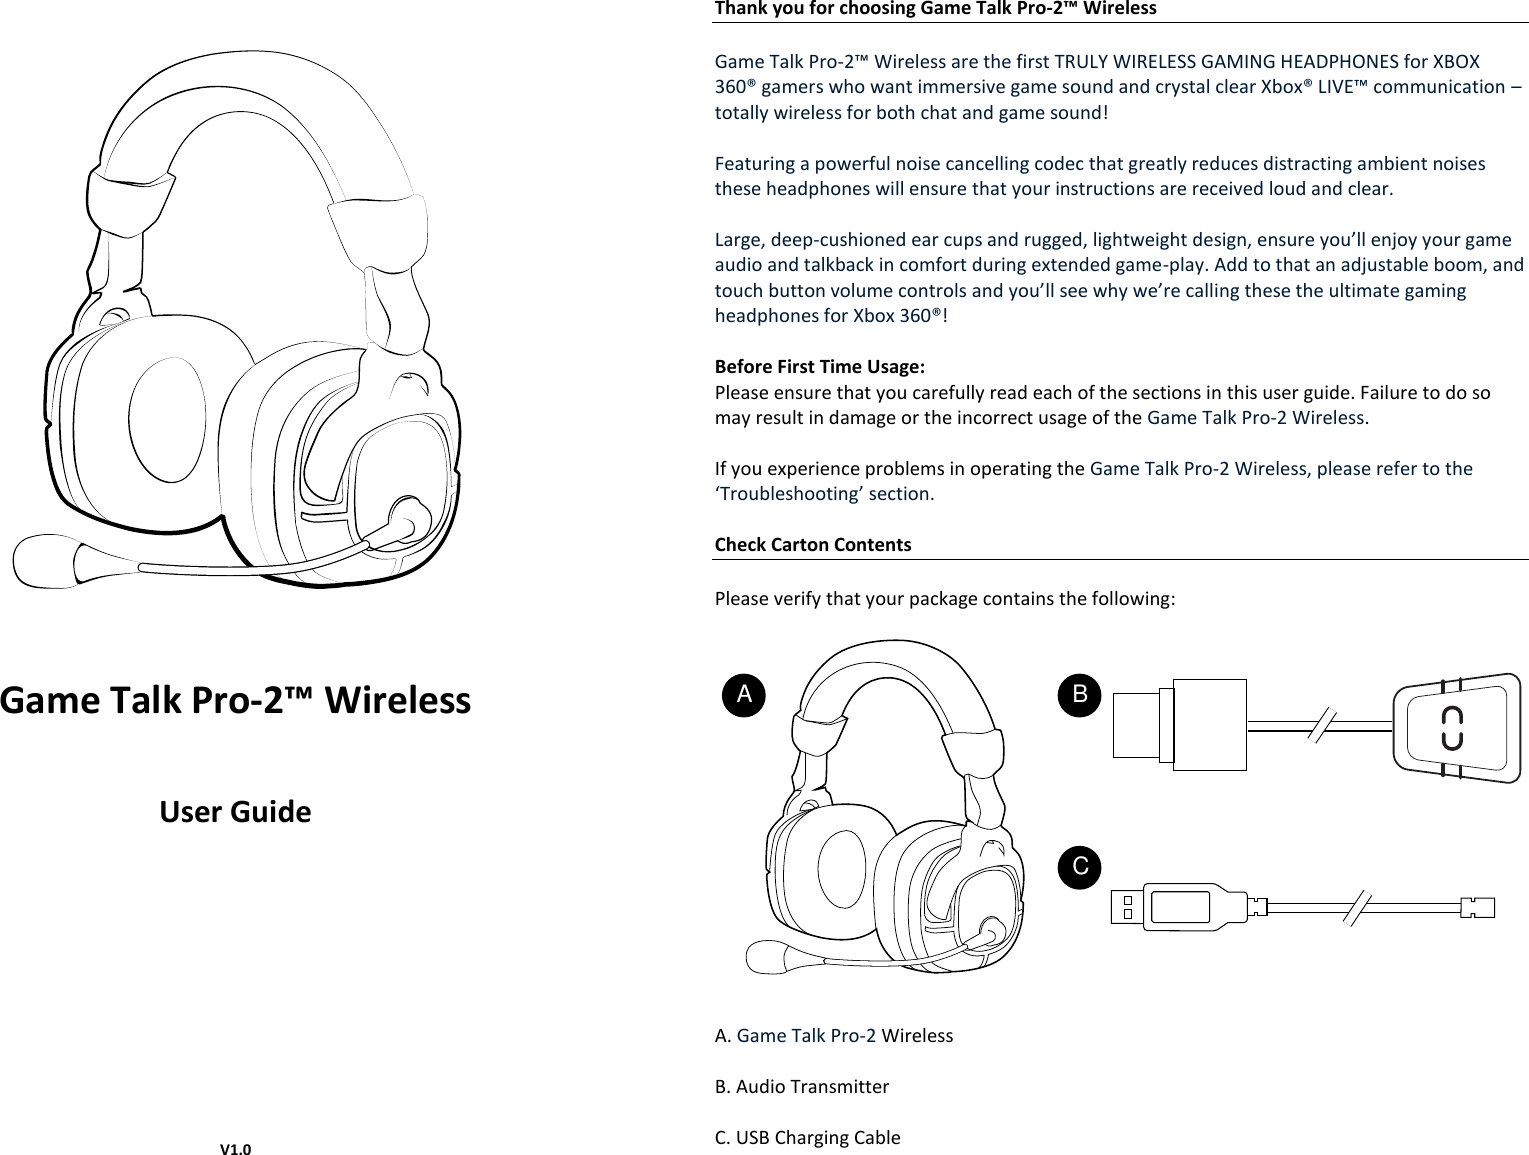       Game Talk Pro-2™ Wireless  User Guide               V1.0 Thank you for choosing Game Talk Pro-2™ Wireless  Game Talk Pro-2™ Wireless are the first TRULY WIRELESS GAMING HEADPHONES for XBOX 360® gamers who want immersive game sound and crystal clear Xbox® LIVE™ communication – totally wireless for both chat and game sound!  Featuring a powerful noise cancelling codec that greatly reduces distracting ambient noises these headphones will ensure that your instructions are received loud and clear.  Large, deep-cushioned ear cups and rugged, lightweight design, ensure you’ll enjoy your game audio and talkback in comfort during extended game-play. Add to that an adjustable boom, and touch button volume controls and you’ll see why we’re calling these the ultimate gaming headphones for Xbox 360®!  Before First Time Usage: Please ensure that you carefully read each of the sections in this user guide. Failure to do so may result in damage or the incorrect usage of the Game Talk Pro-2 Wireless.  If you experience problems in operating the Game Talk Pro-2 Wireless, please refer to the ‘Troubleshooting’ section.  Check Carton Contents  Please verify that your package contains the following:     A. Game Talk Pro-2 Wireless  B. Audio Transmitter  C. USB Charging Cable    A BC